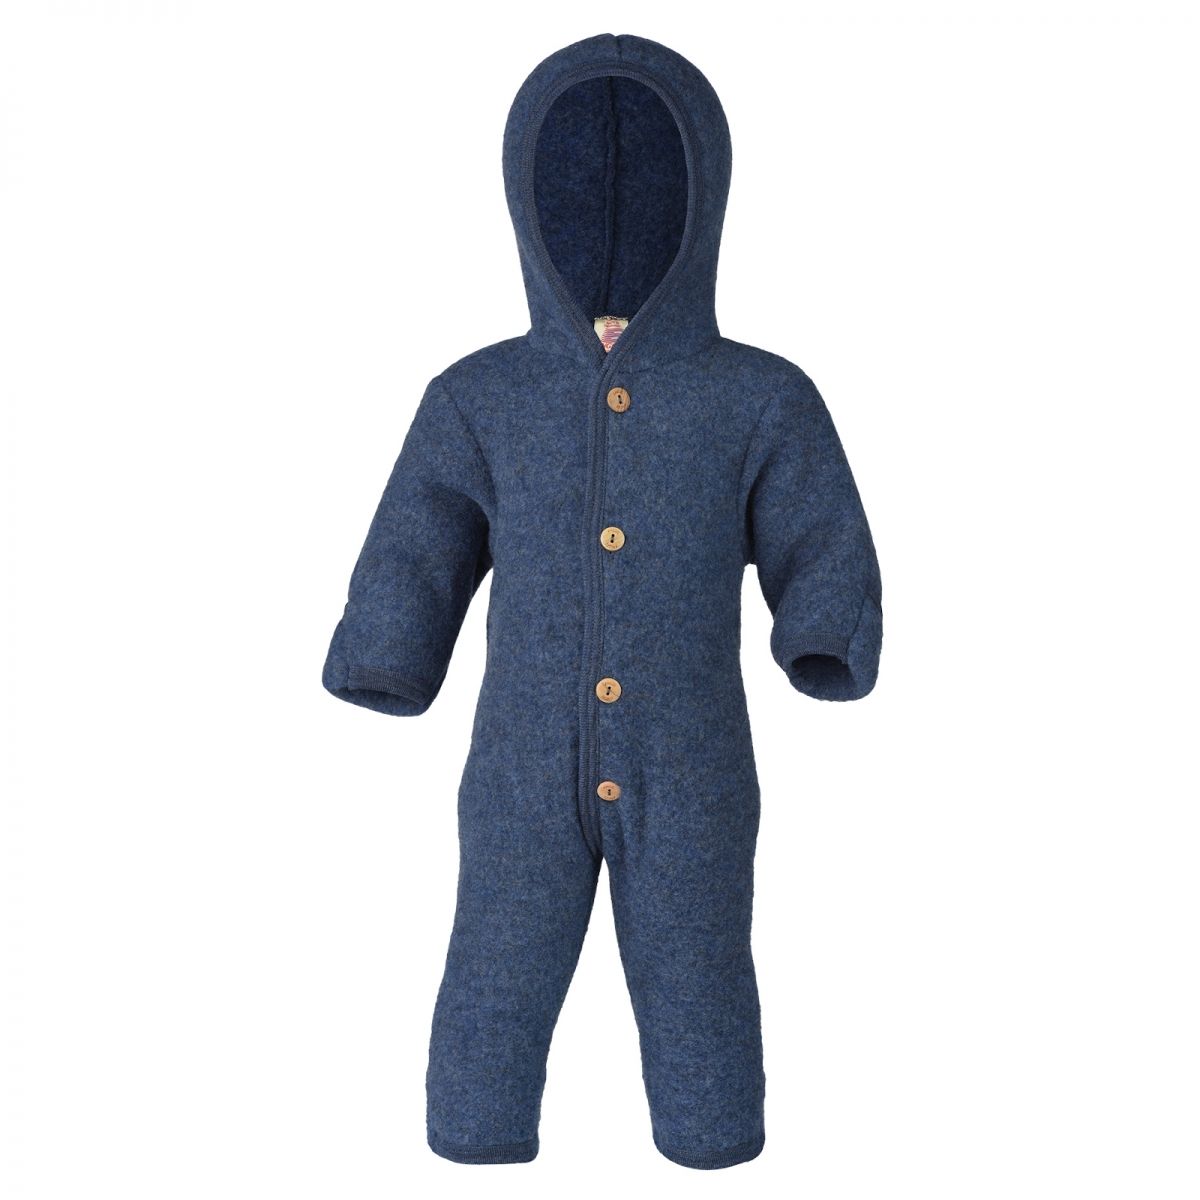 ENGEL Natur Hooded overall with buttons Blue melange 575722-080 